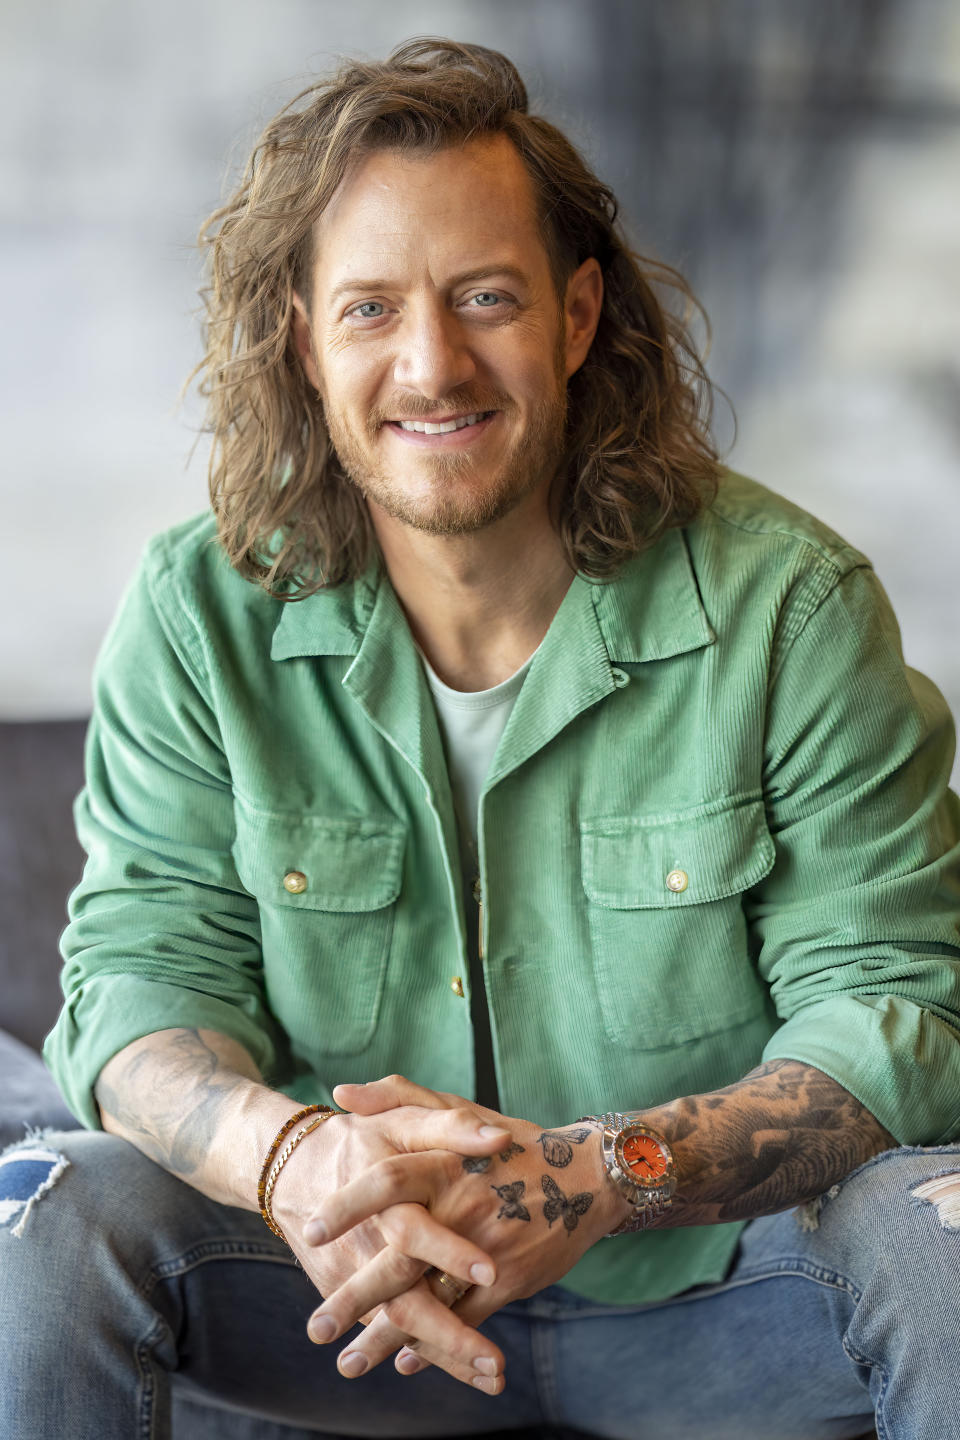 Tyler Hubbard, a member of the duo Florida Georgia Line, poses for a portrait on Tuesday, Jan. 17, 2023, in Nashville, Tenn. A year after launching his solo career, Hubbard has reintroduced himself to fans with two hit solo songs and a debut record. (Photo by Ed Rode/Invision/AP)